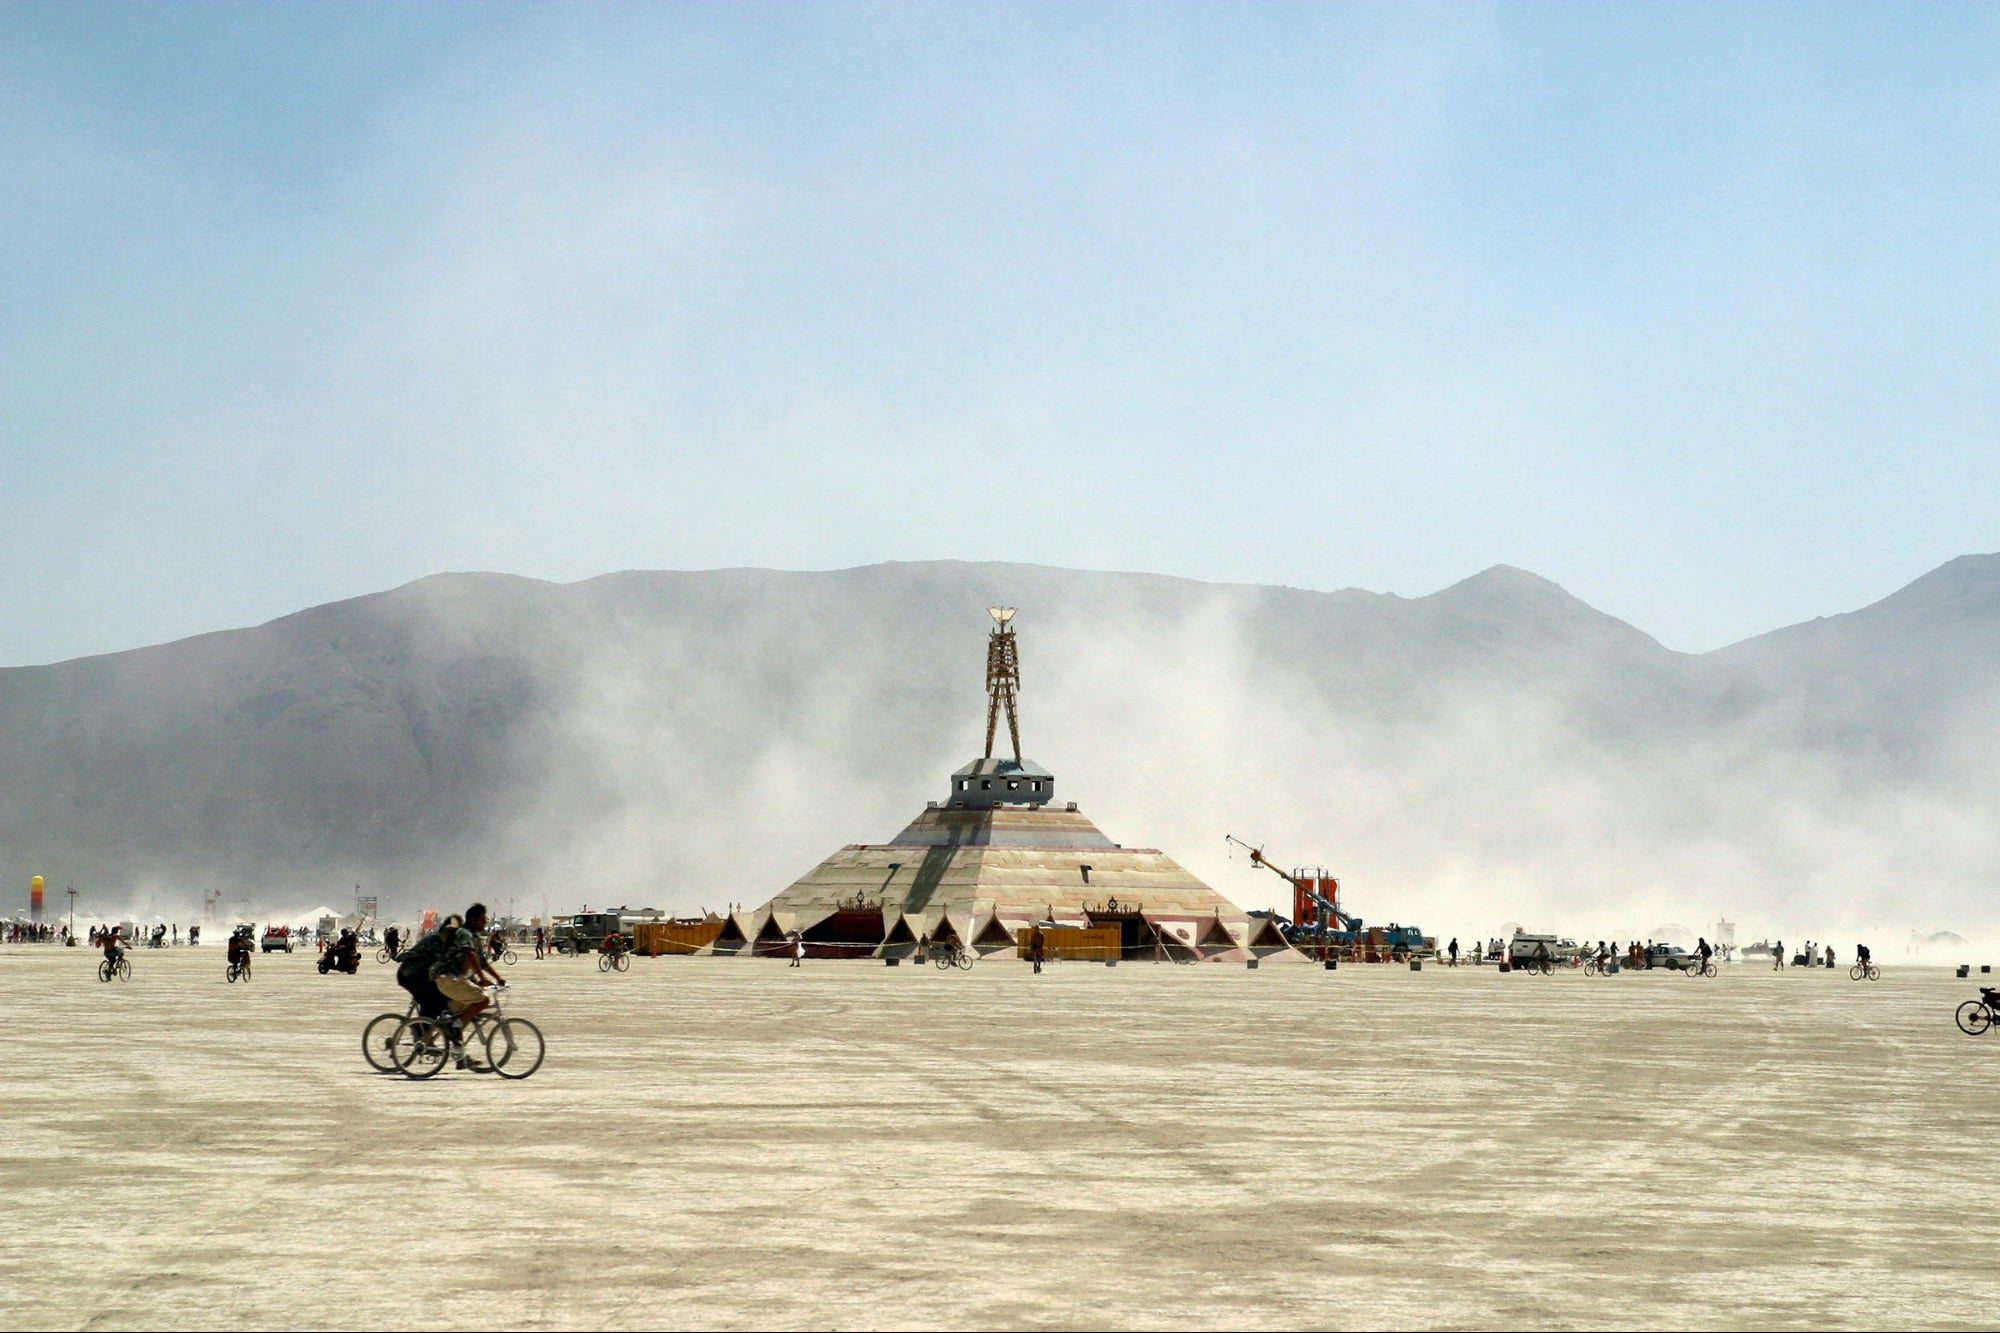 Leadership Lessons From Ted Talks, the Oscars, and Burning Man